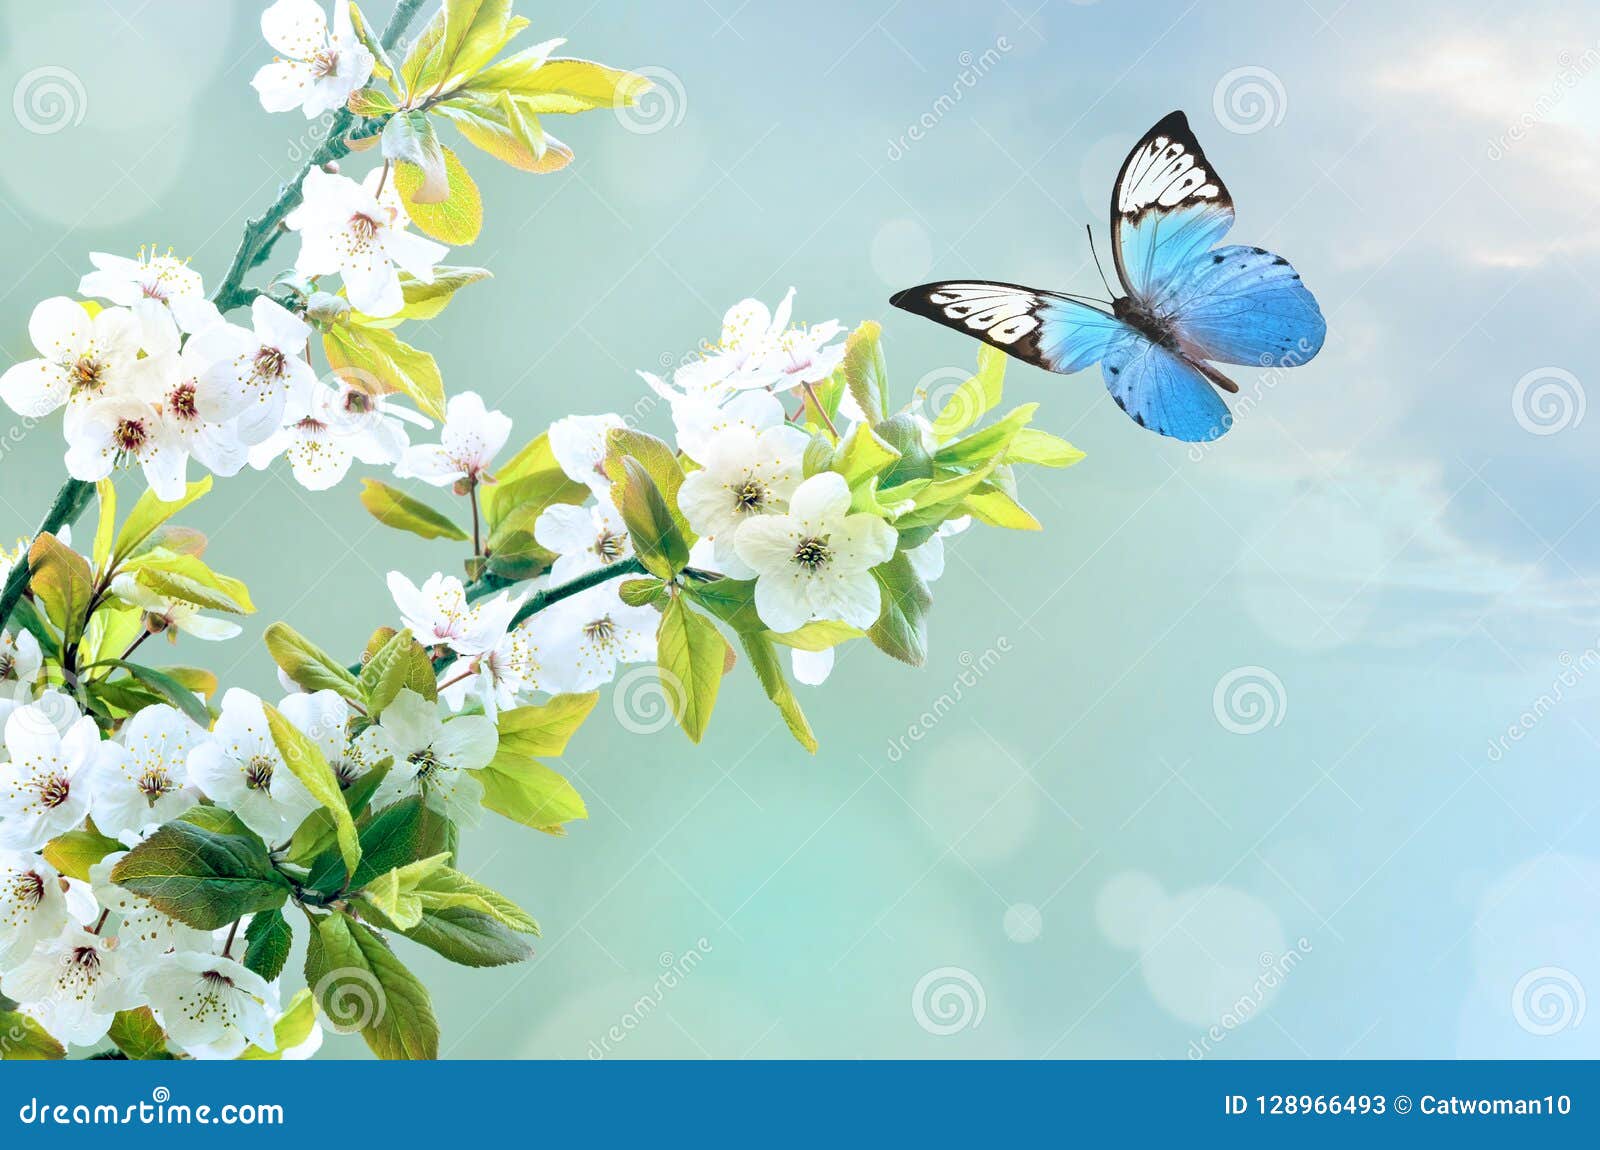 Beautiful Butterfly on White Flower, Sky Background Stock Image ...